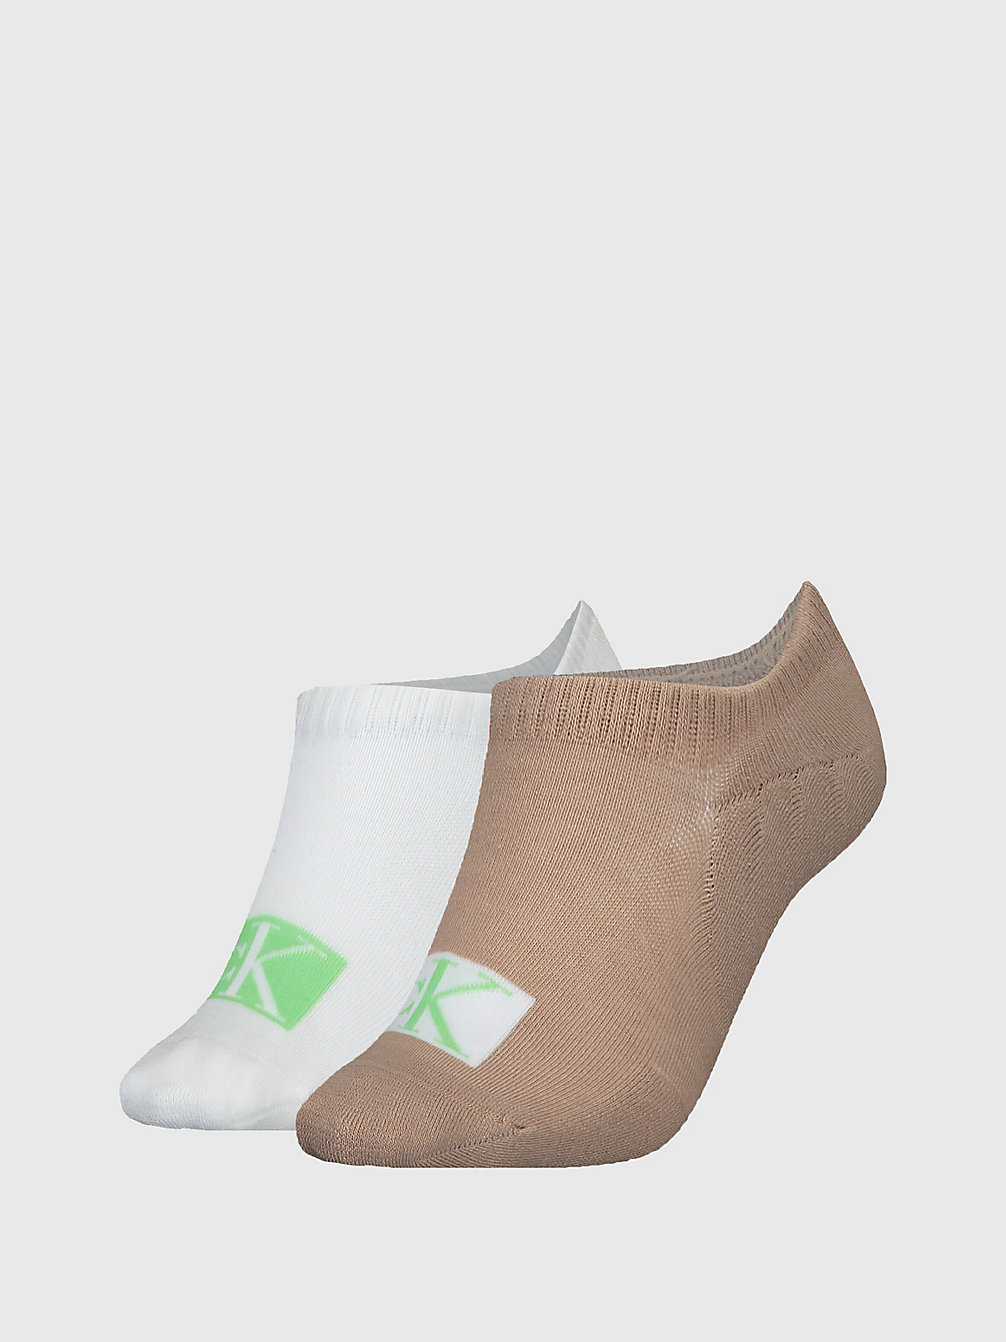 LIME 2 Pack Invisible Socks undefined women Calvin Klein